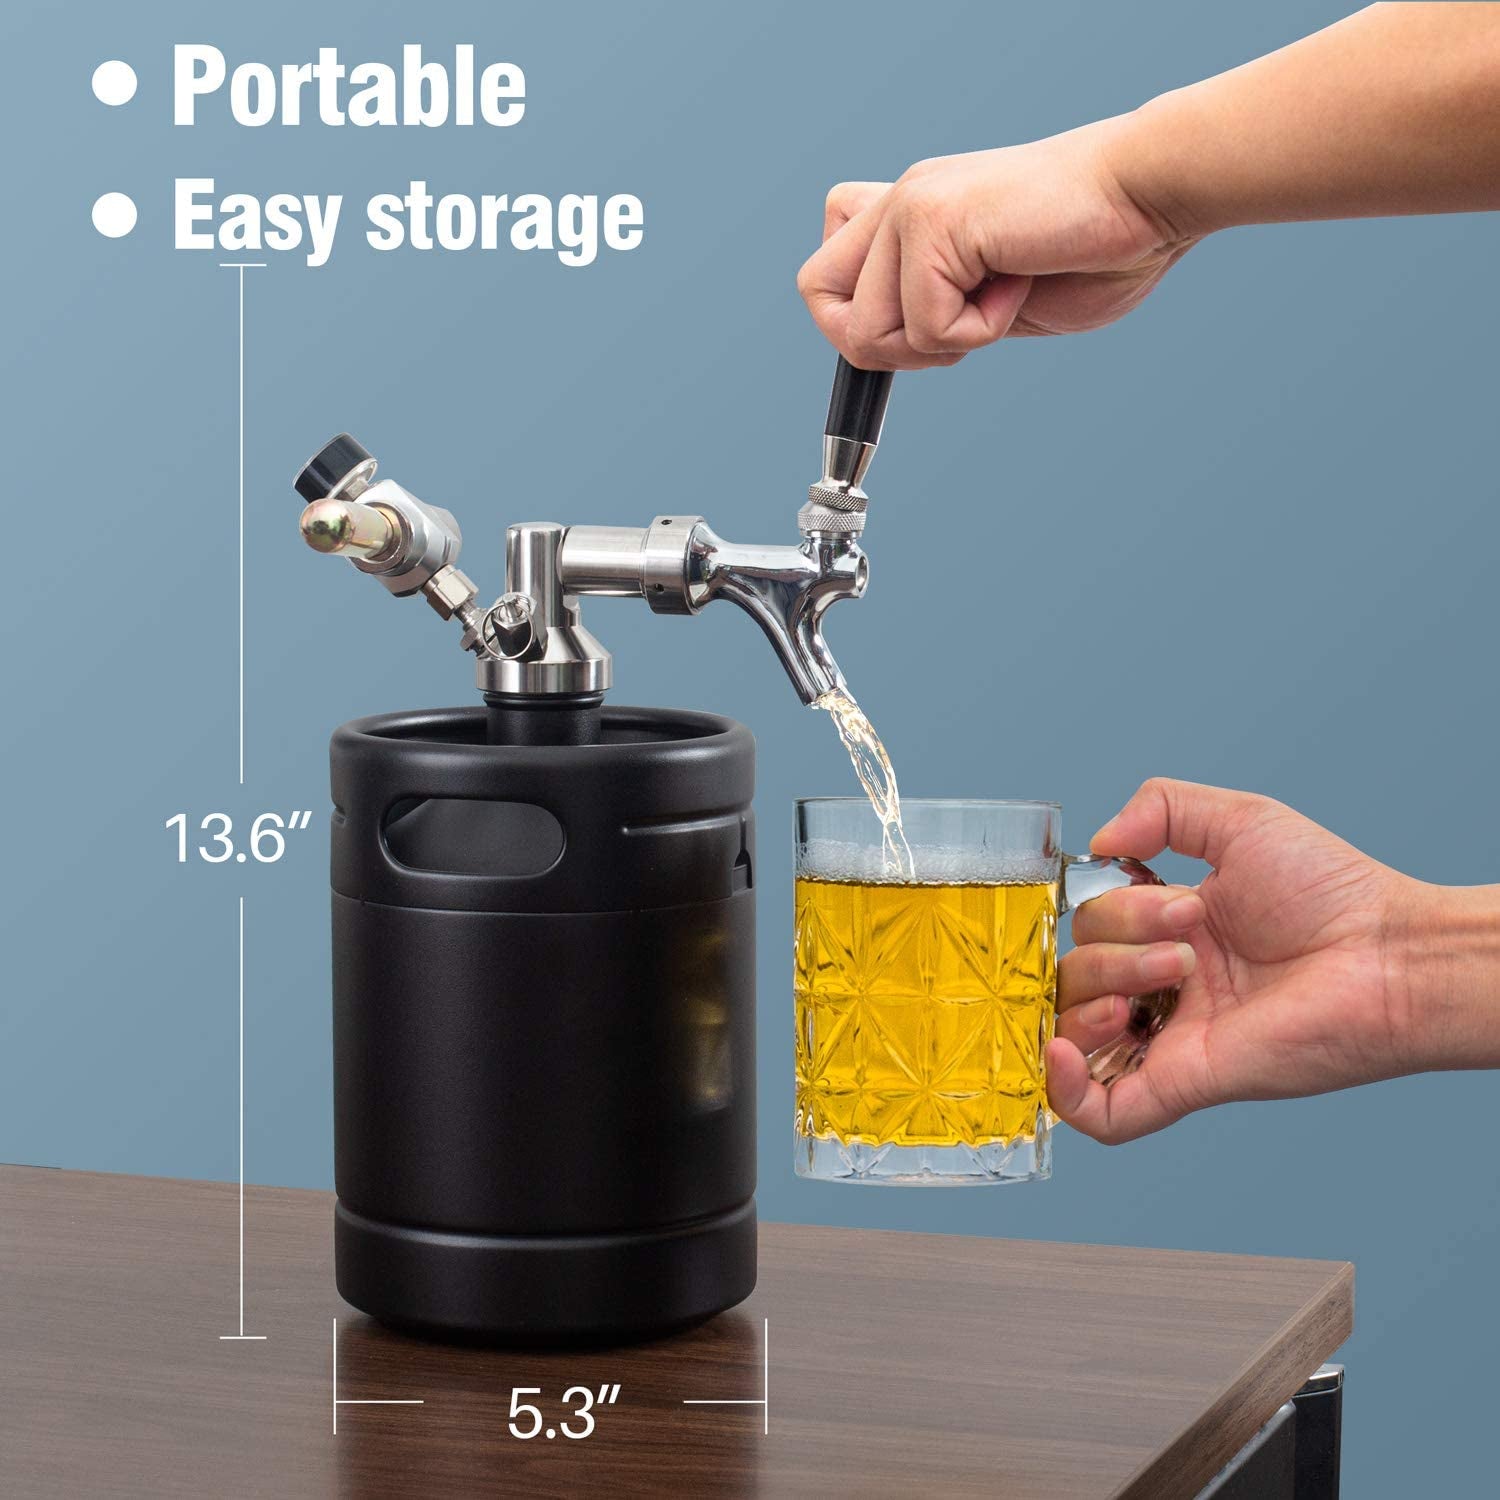 64Oz Growler Tap System, Pressurized Stainless Steel Mini Keg with Cooler Jacket, Portable Home Dispenser System to Keep Fresh and Carbonation for Draft, Homebrew and Craft Beer (Matte Black)